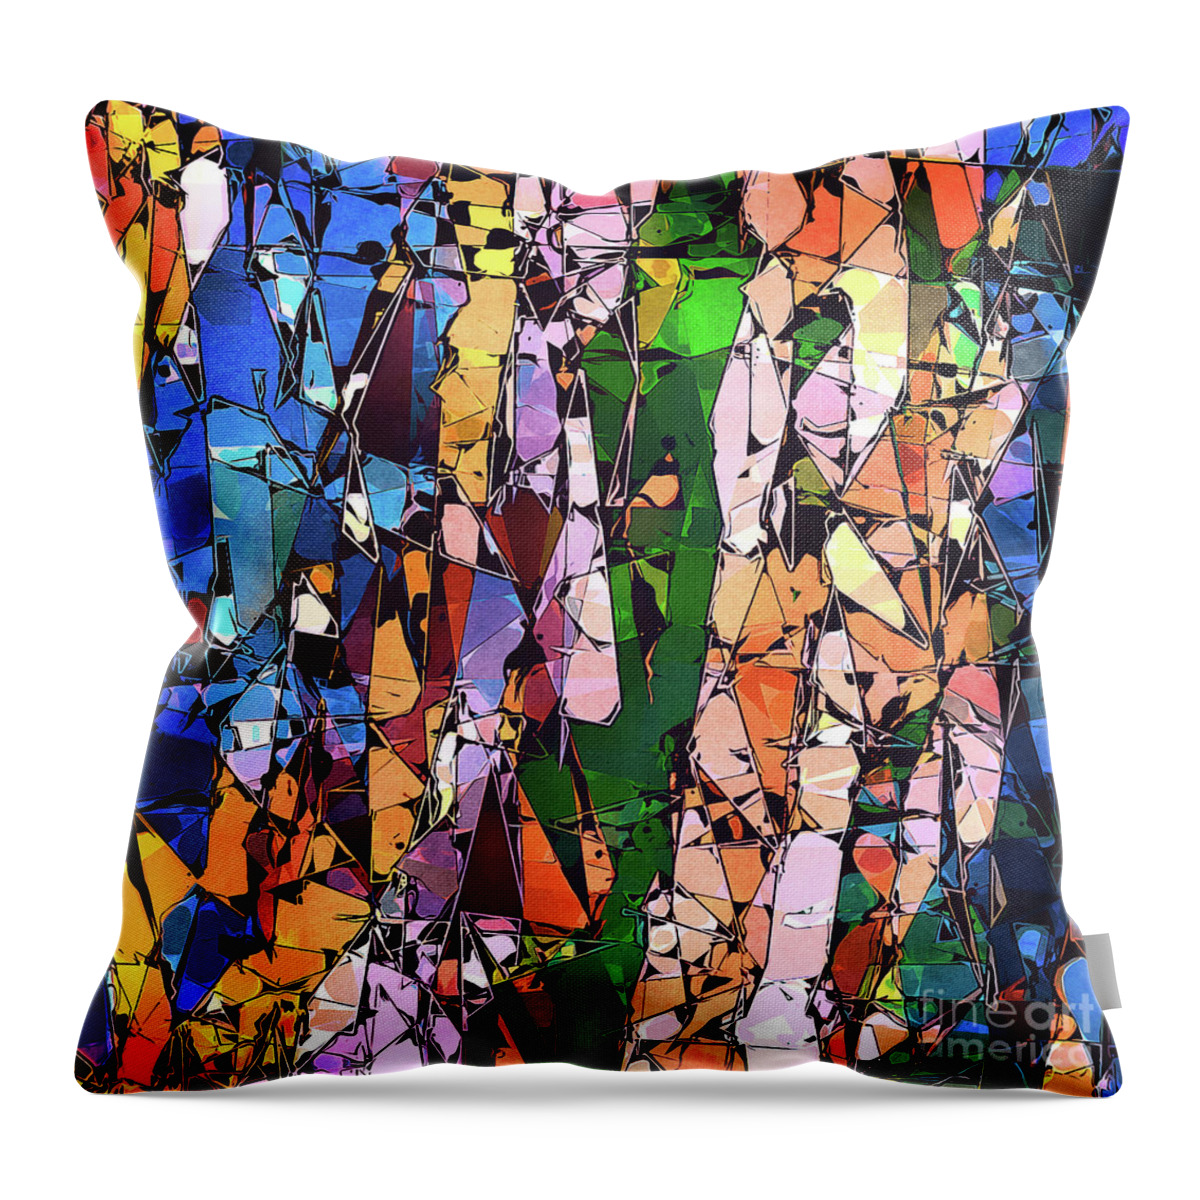 Stained Glass Throw Pillow featuring the digital art Abstract Stained Glass #1 by Phil Perkins